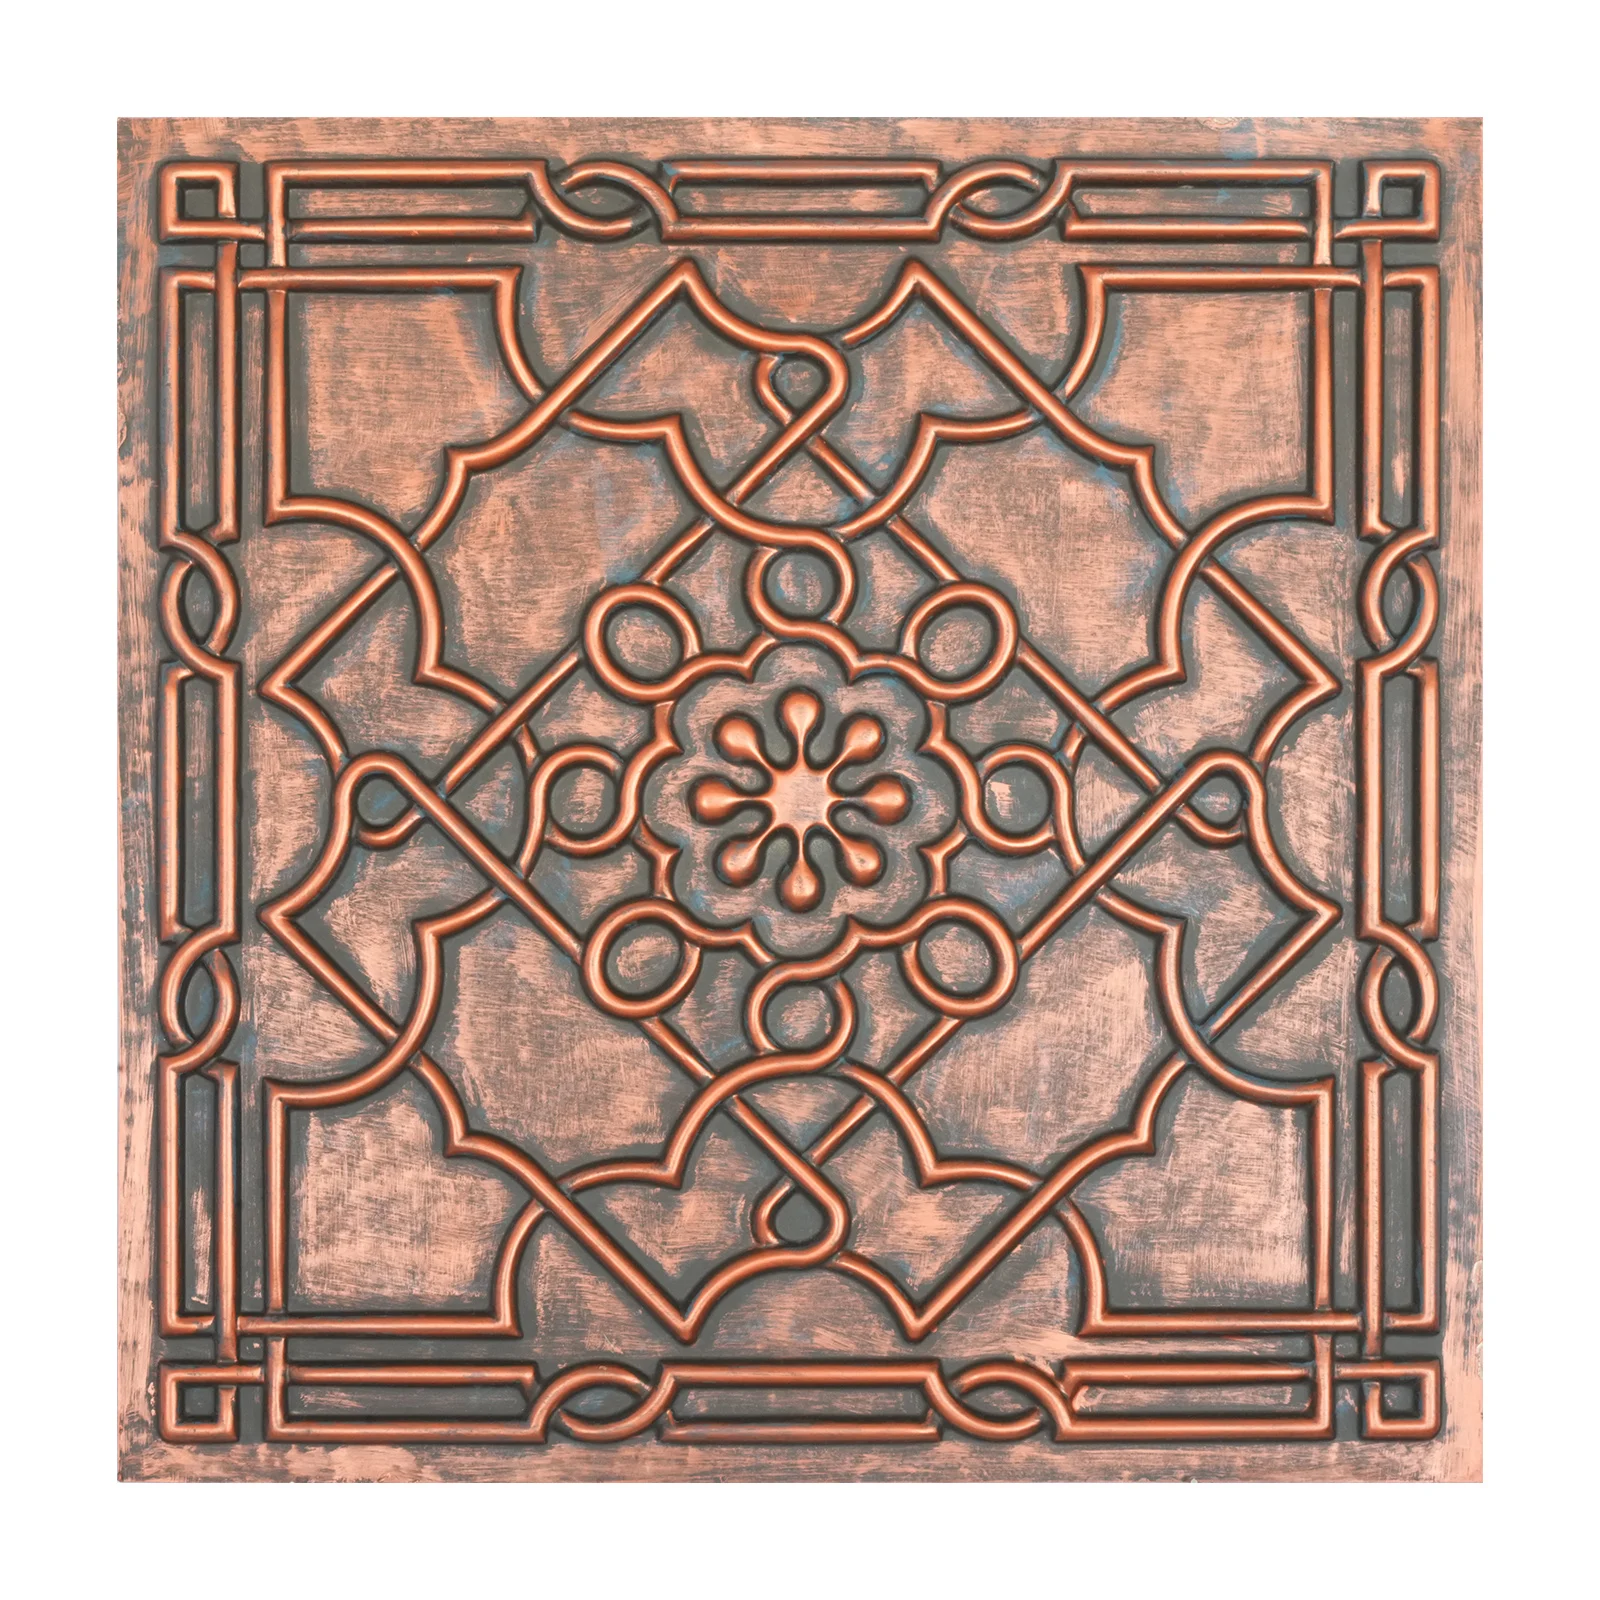 Vintage Pattern Tin Ceiling Tiles Embossed Wall Panel Easy Drop-In Installation PL09  Rustic copper